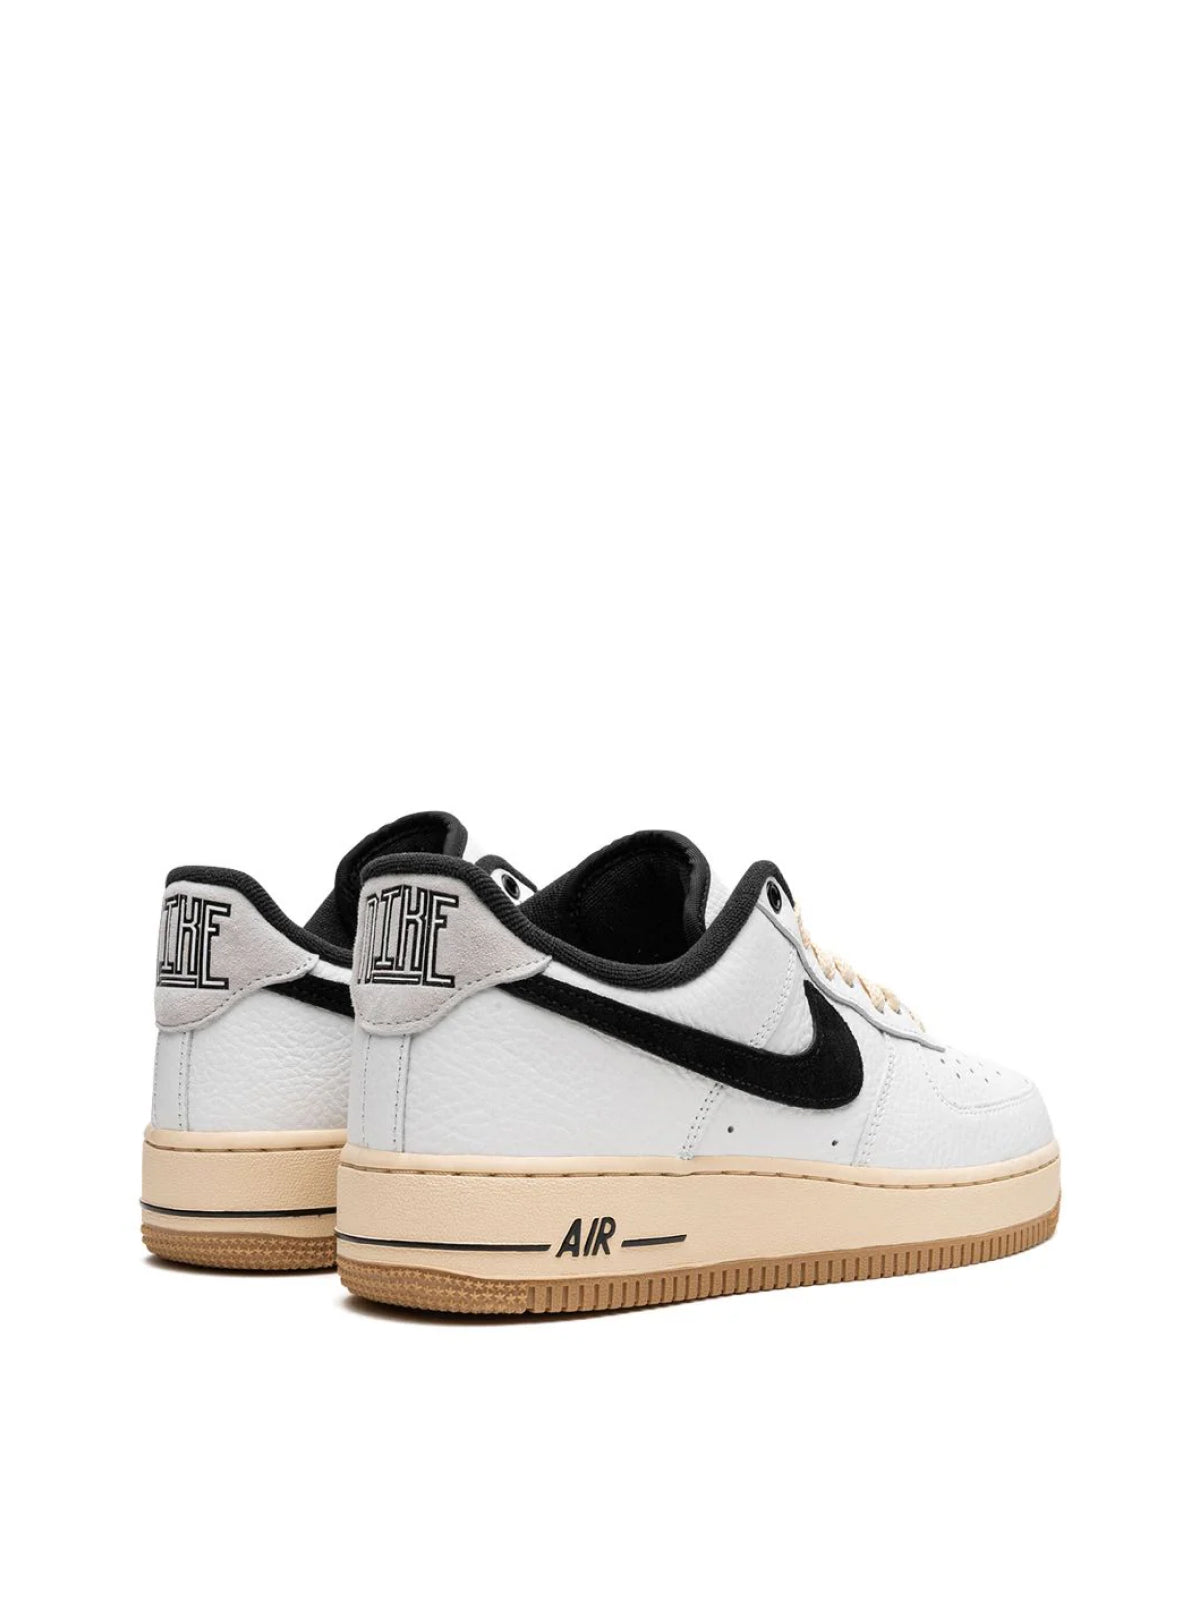 Nike-OUTLET-SALE-Air Force 1 '07 LX 'Command Force' Sneakers-ARCHIVIST